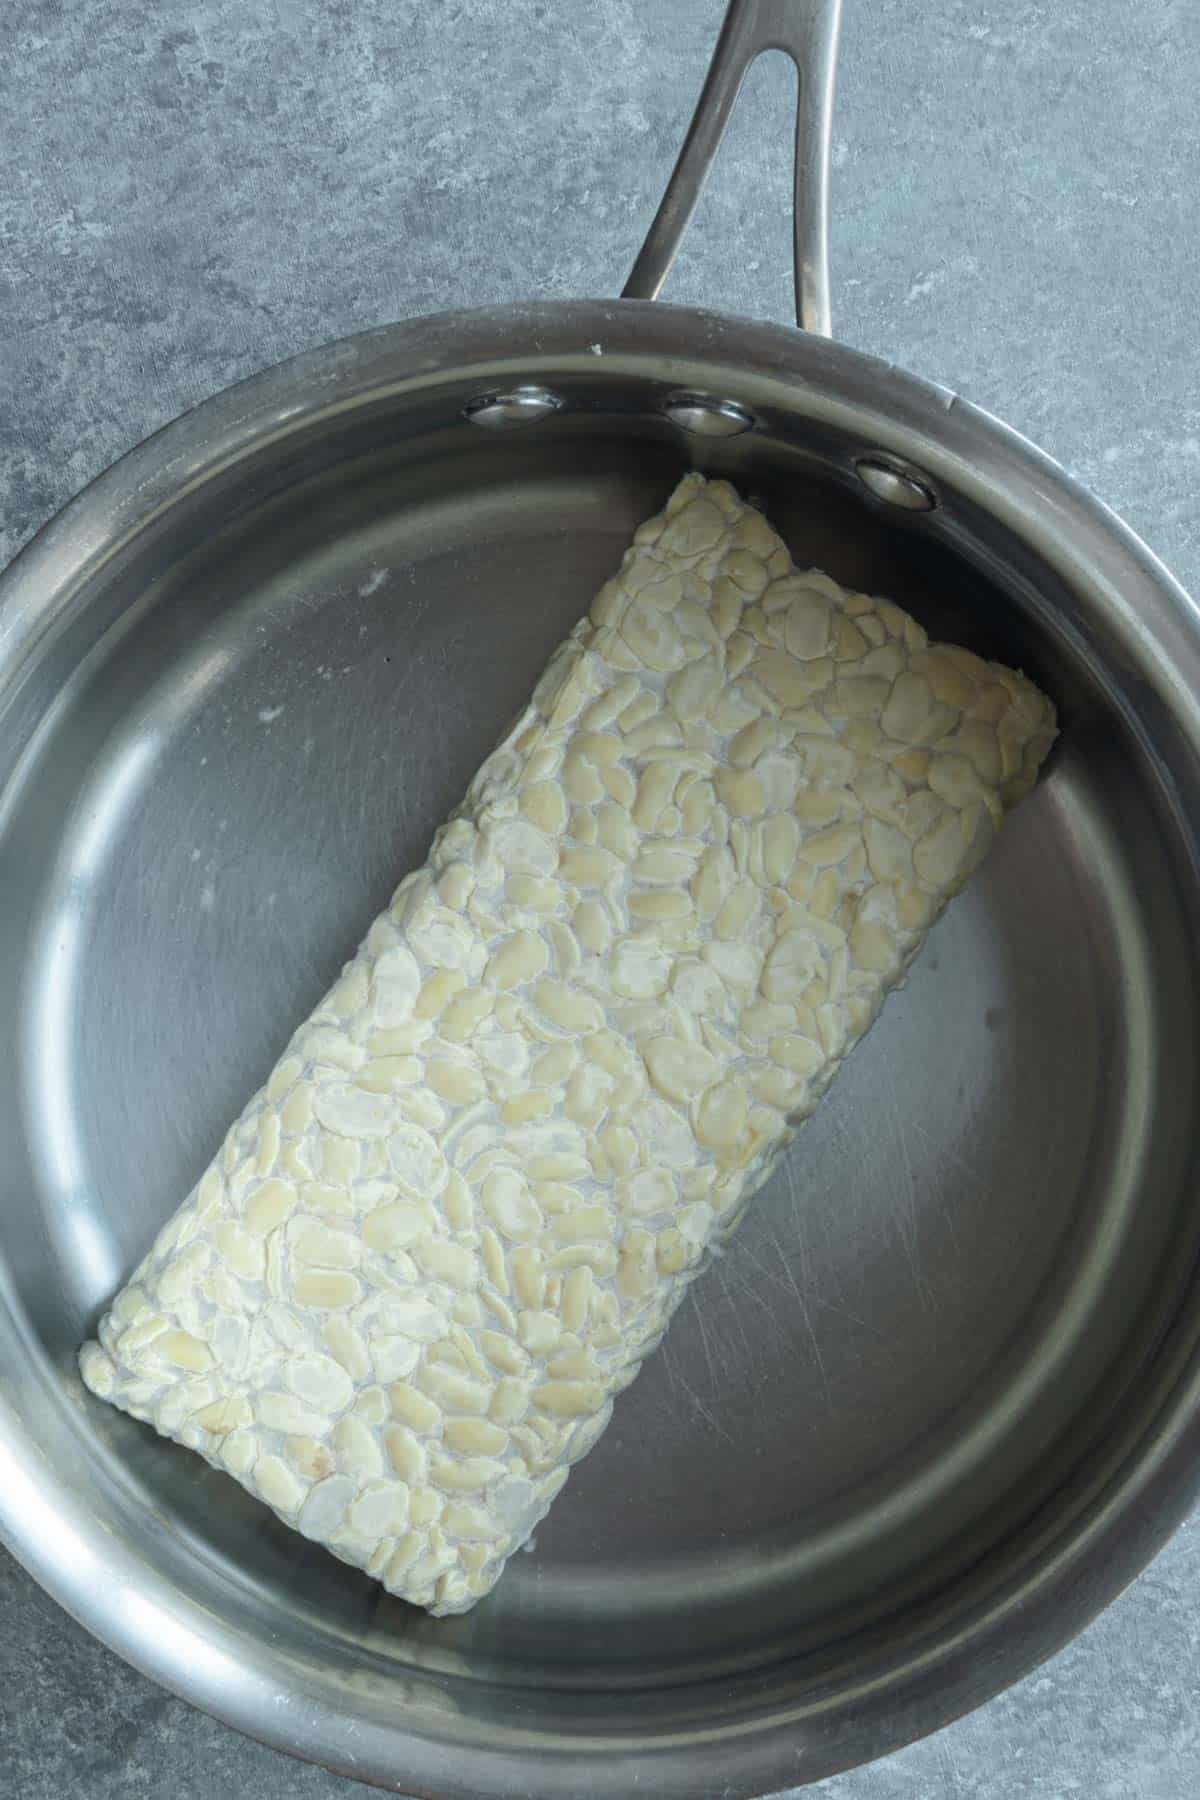 A block of tempeh simmering in a stainless steel saucepan.